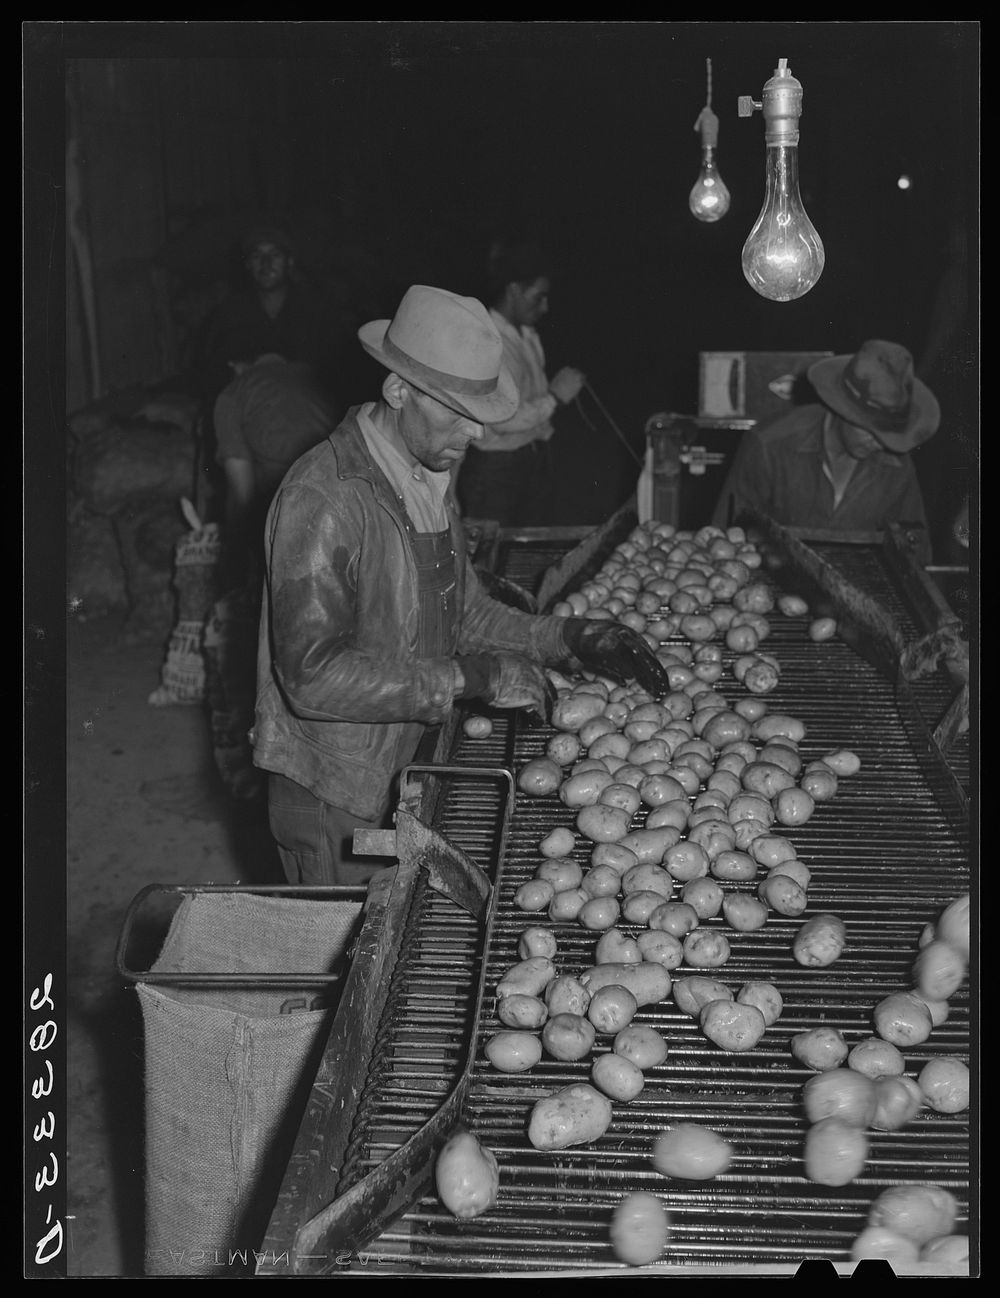 Inspecting washed potatoes. Monte Vista, Colorado. Sourced from the Library of Congress.